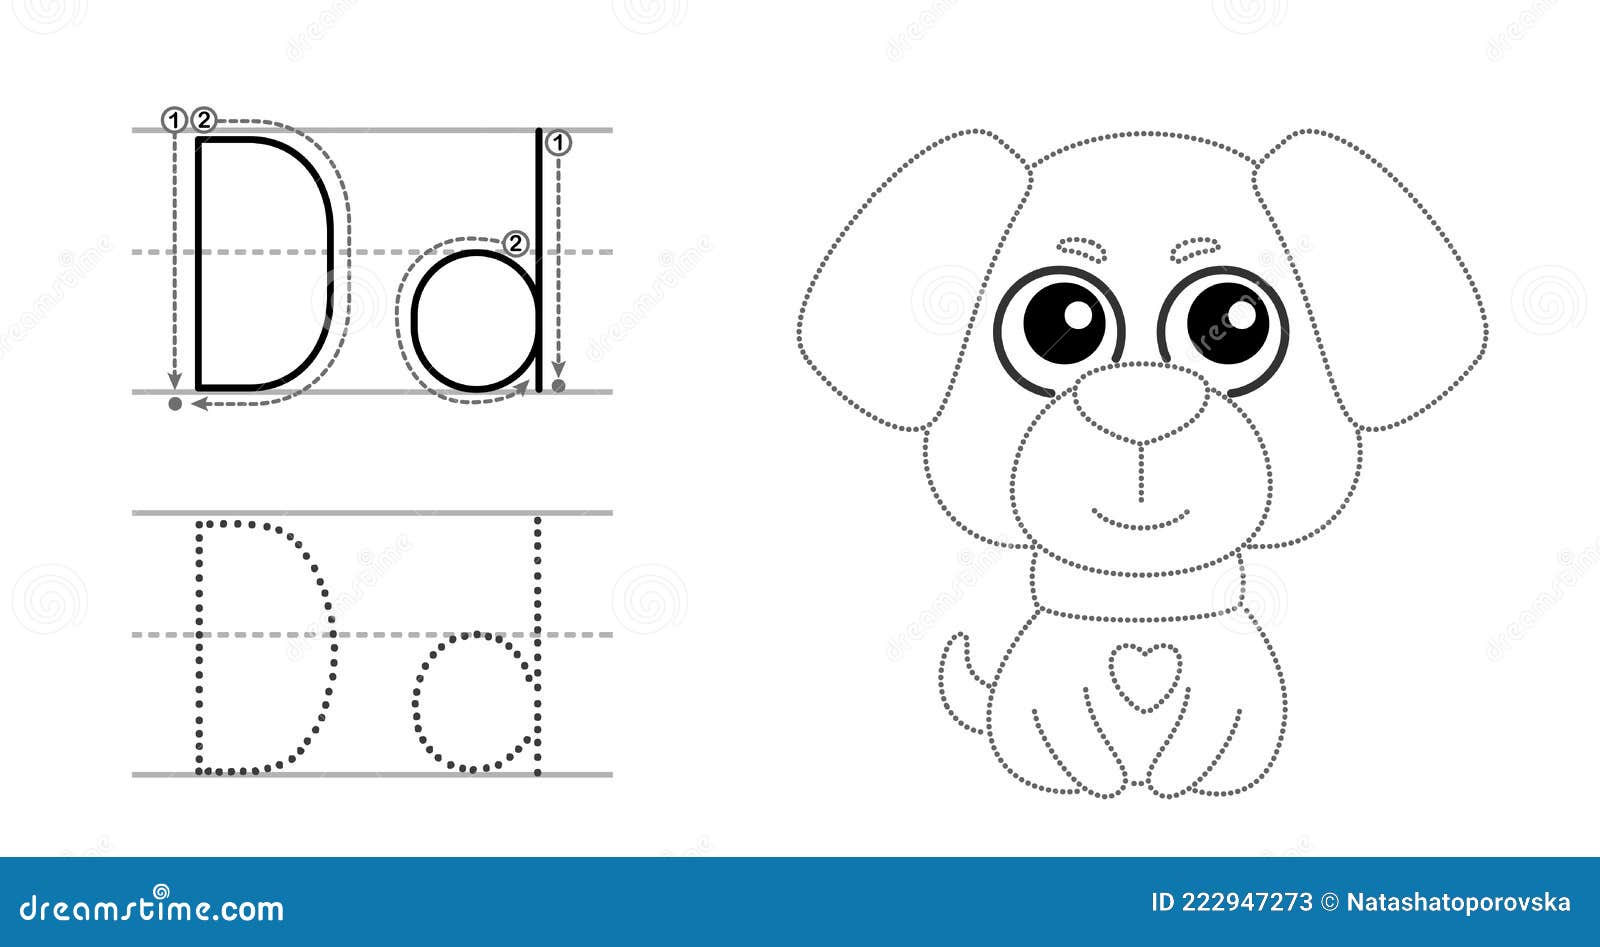 trace the letter and picture and color it. educational children tracing game. coloring alphabet. letter d and funny dog